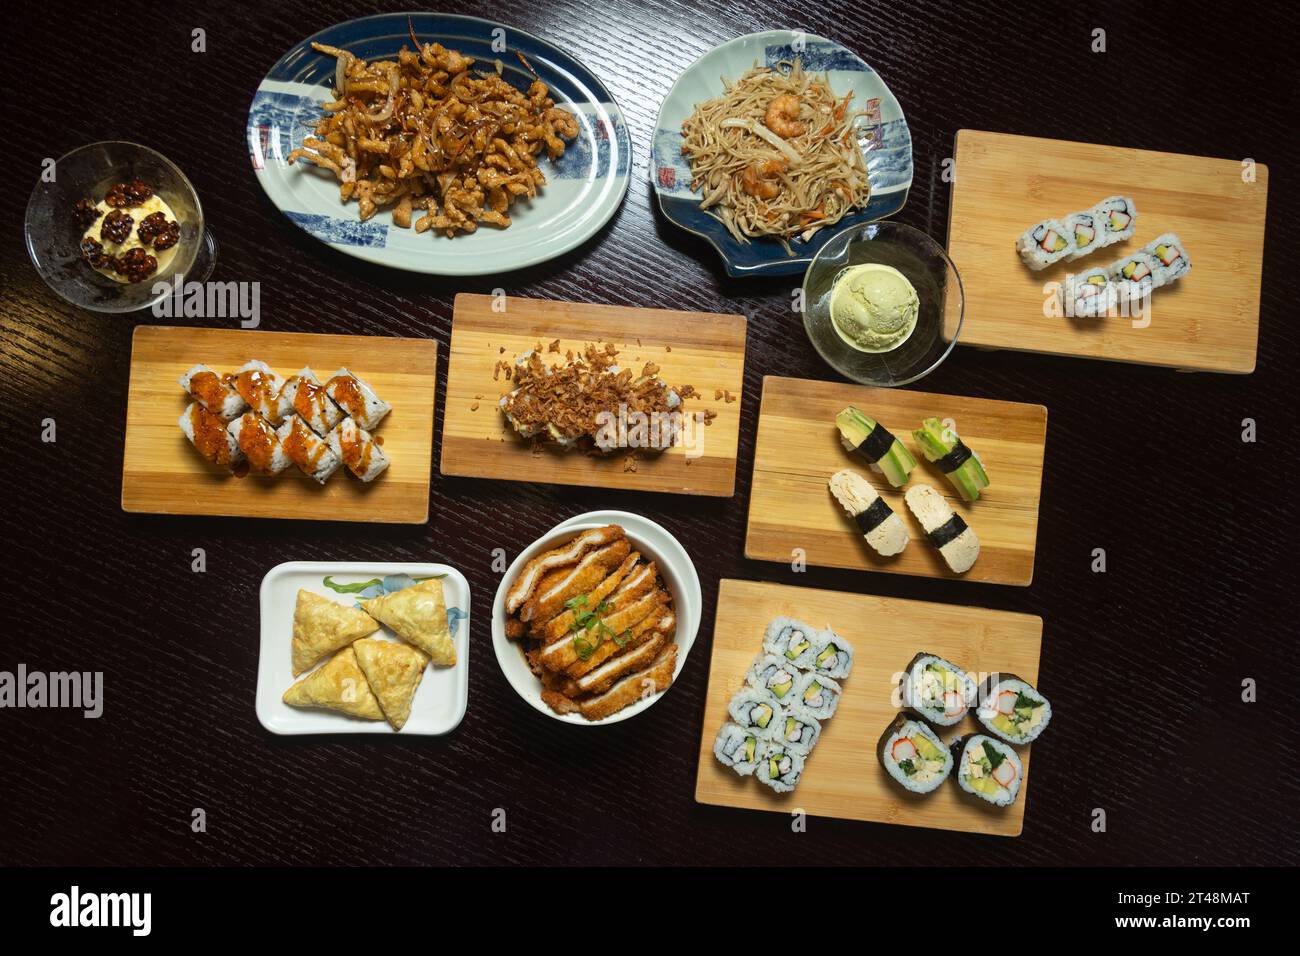 Table with a variety of Japanese food dishes Stock Photo